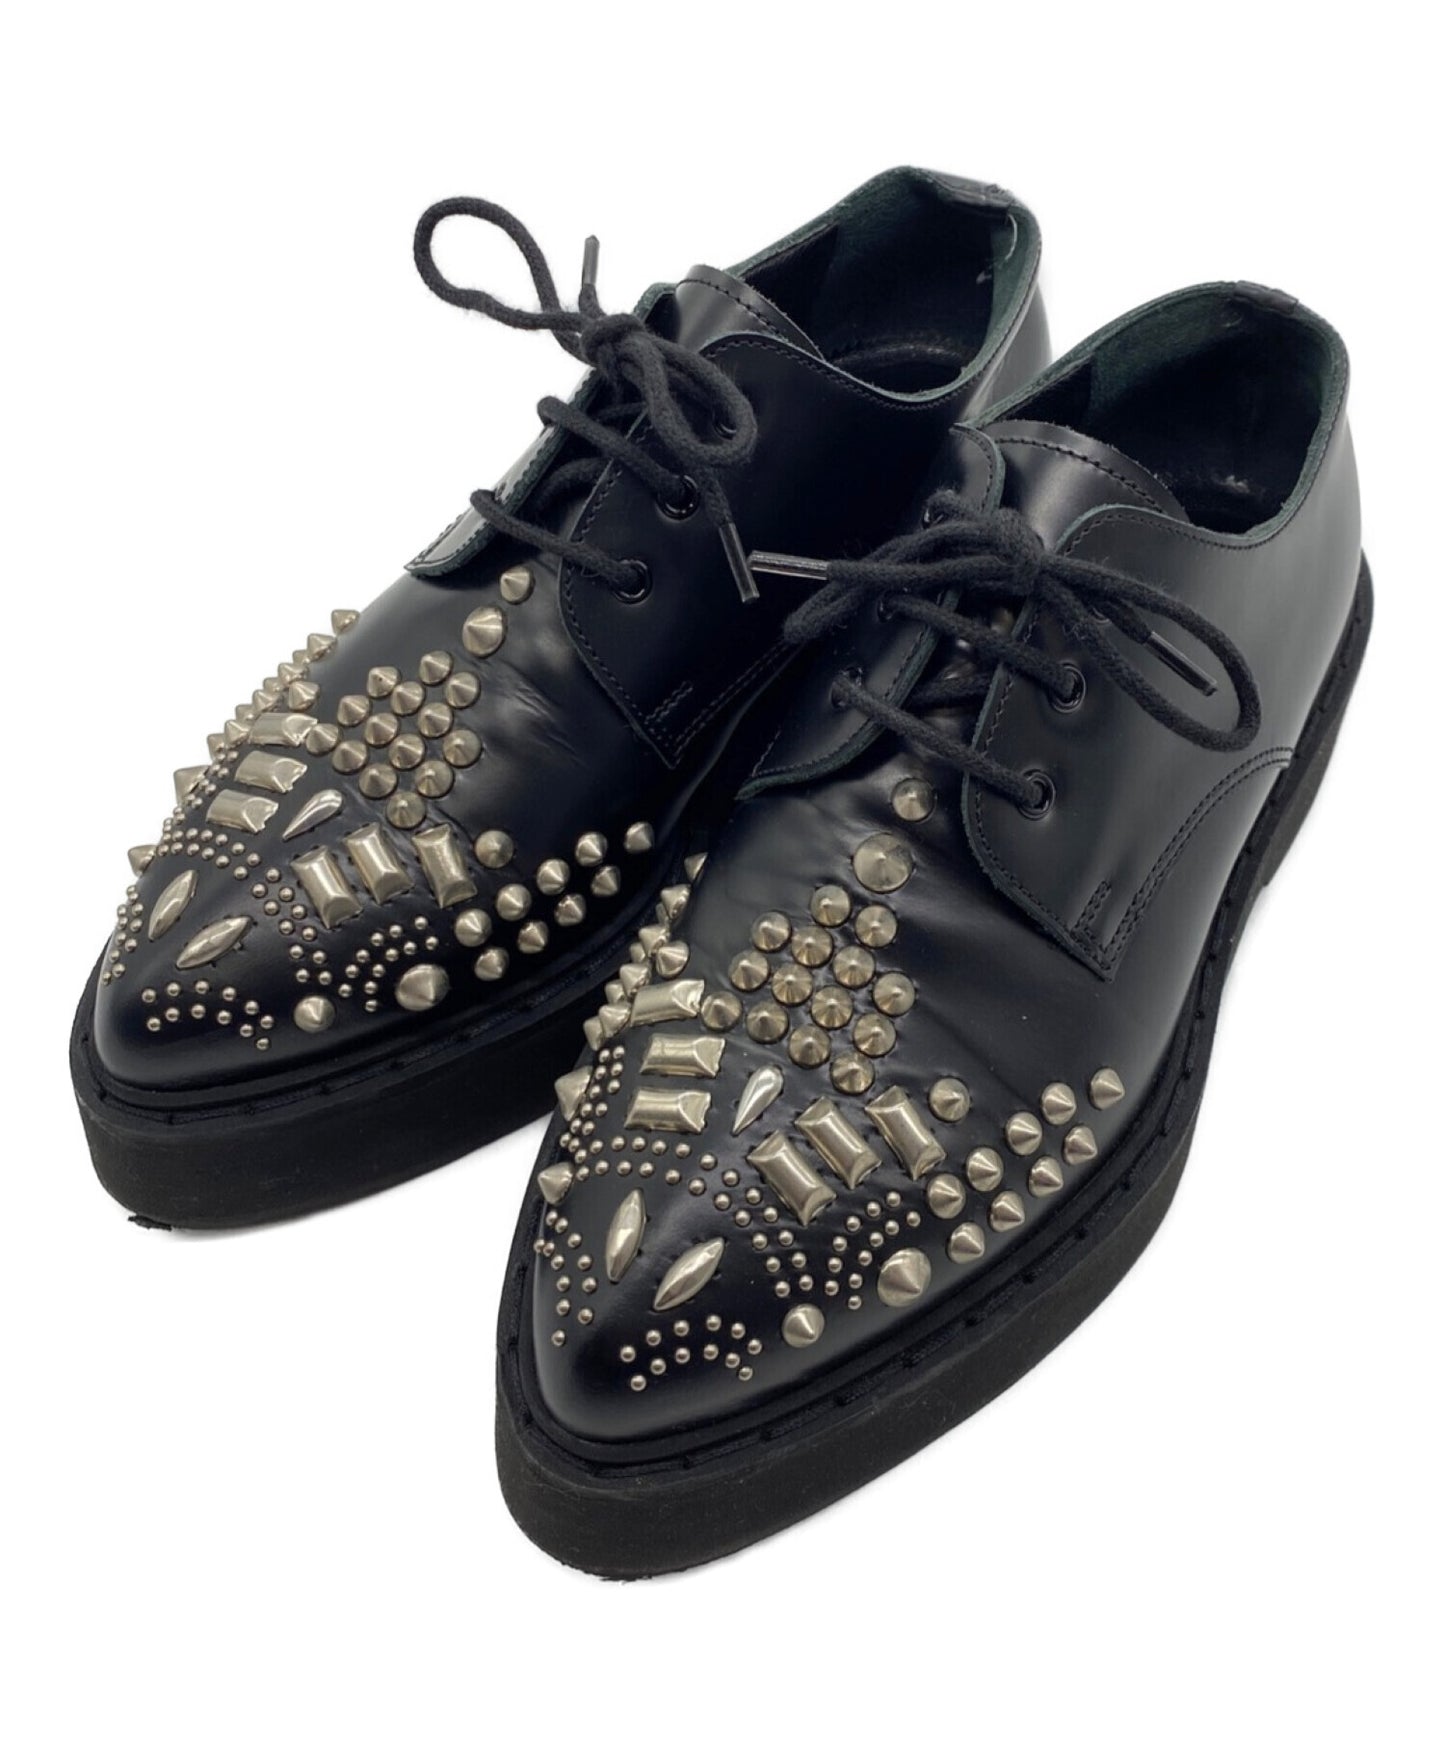 ALEXANDER McQUEEN Studded Leather Shoes